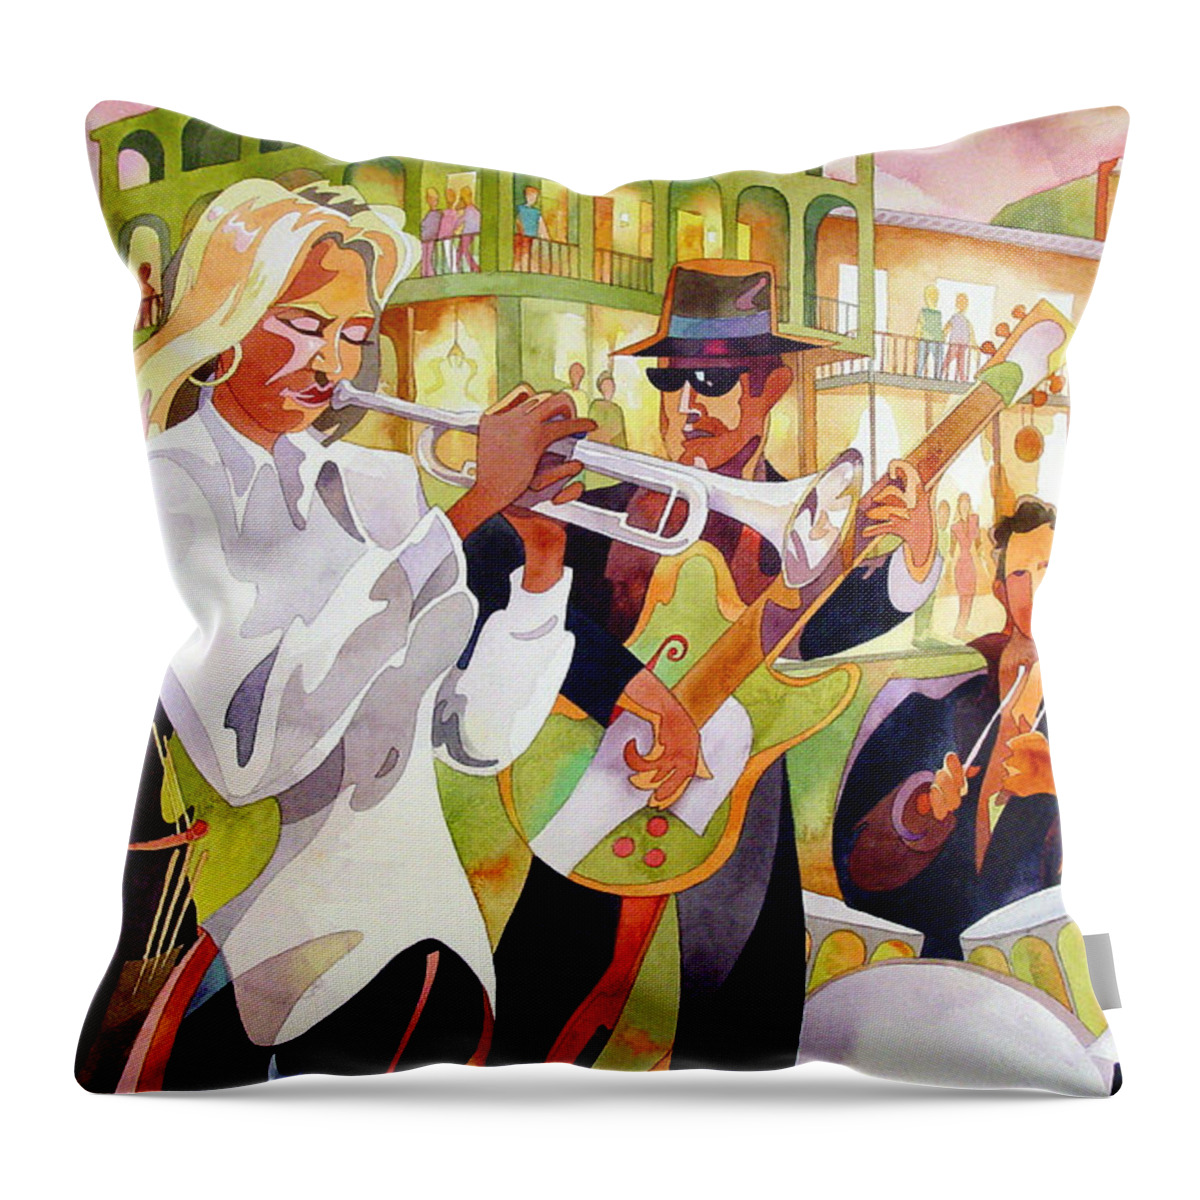 Watercolor Throw Pillow featuring the painting The Street Performers by Mick Williams